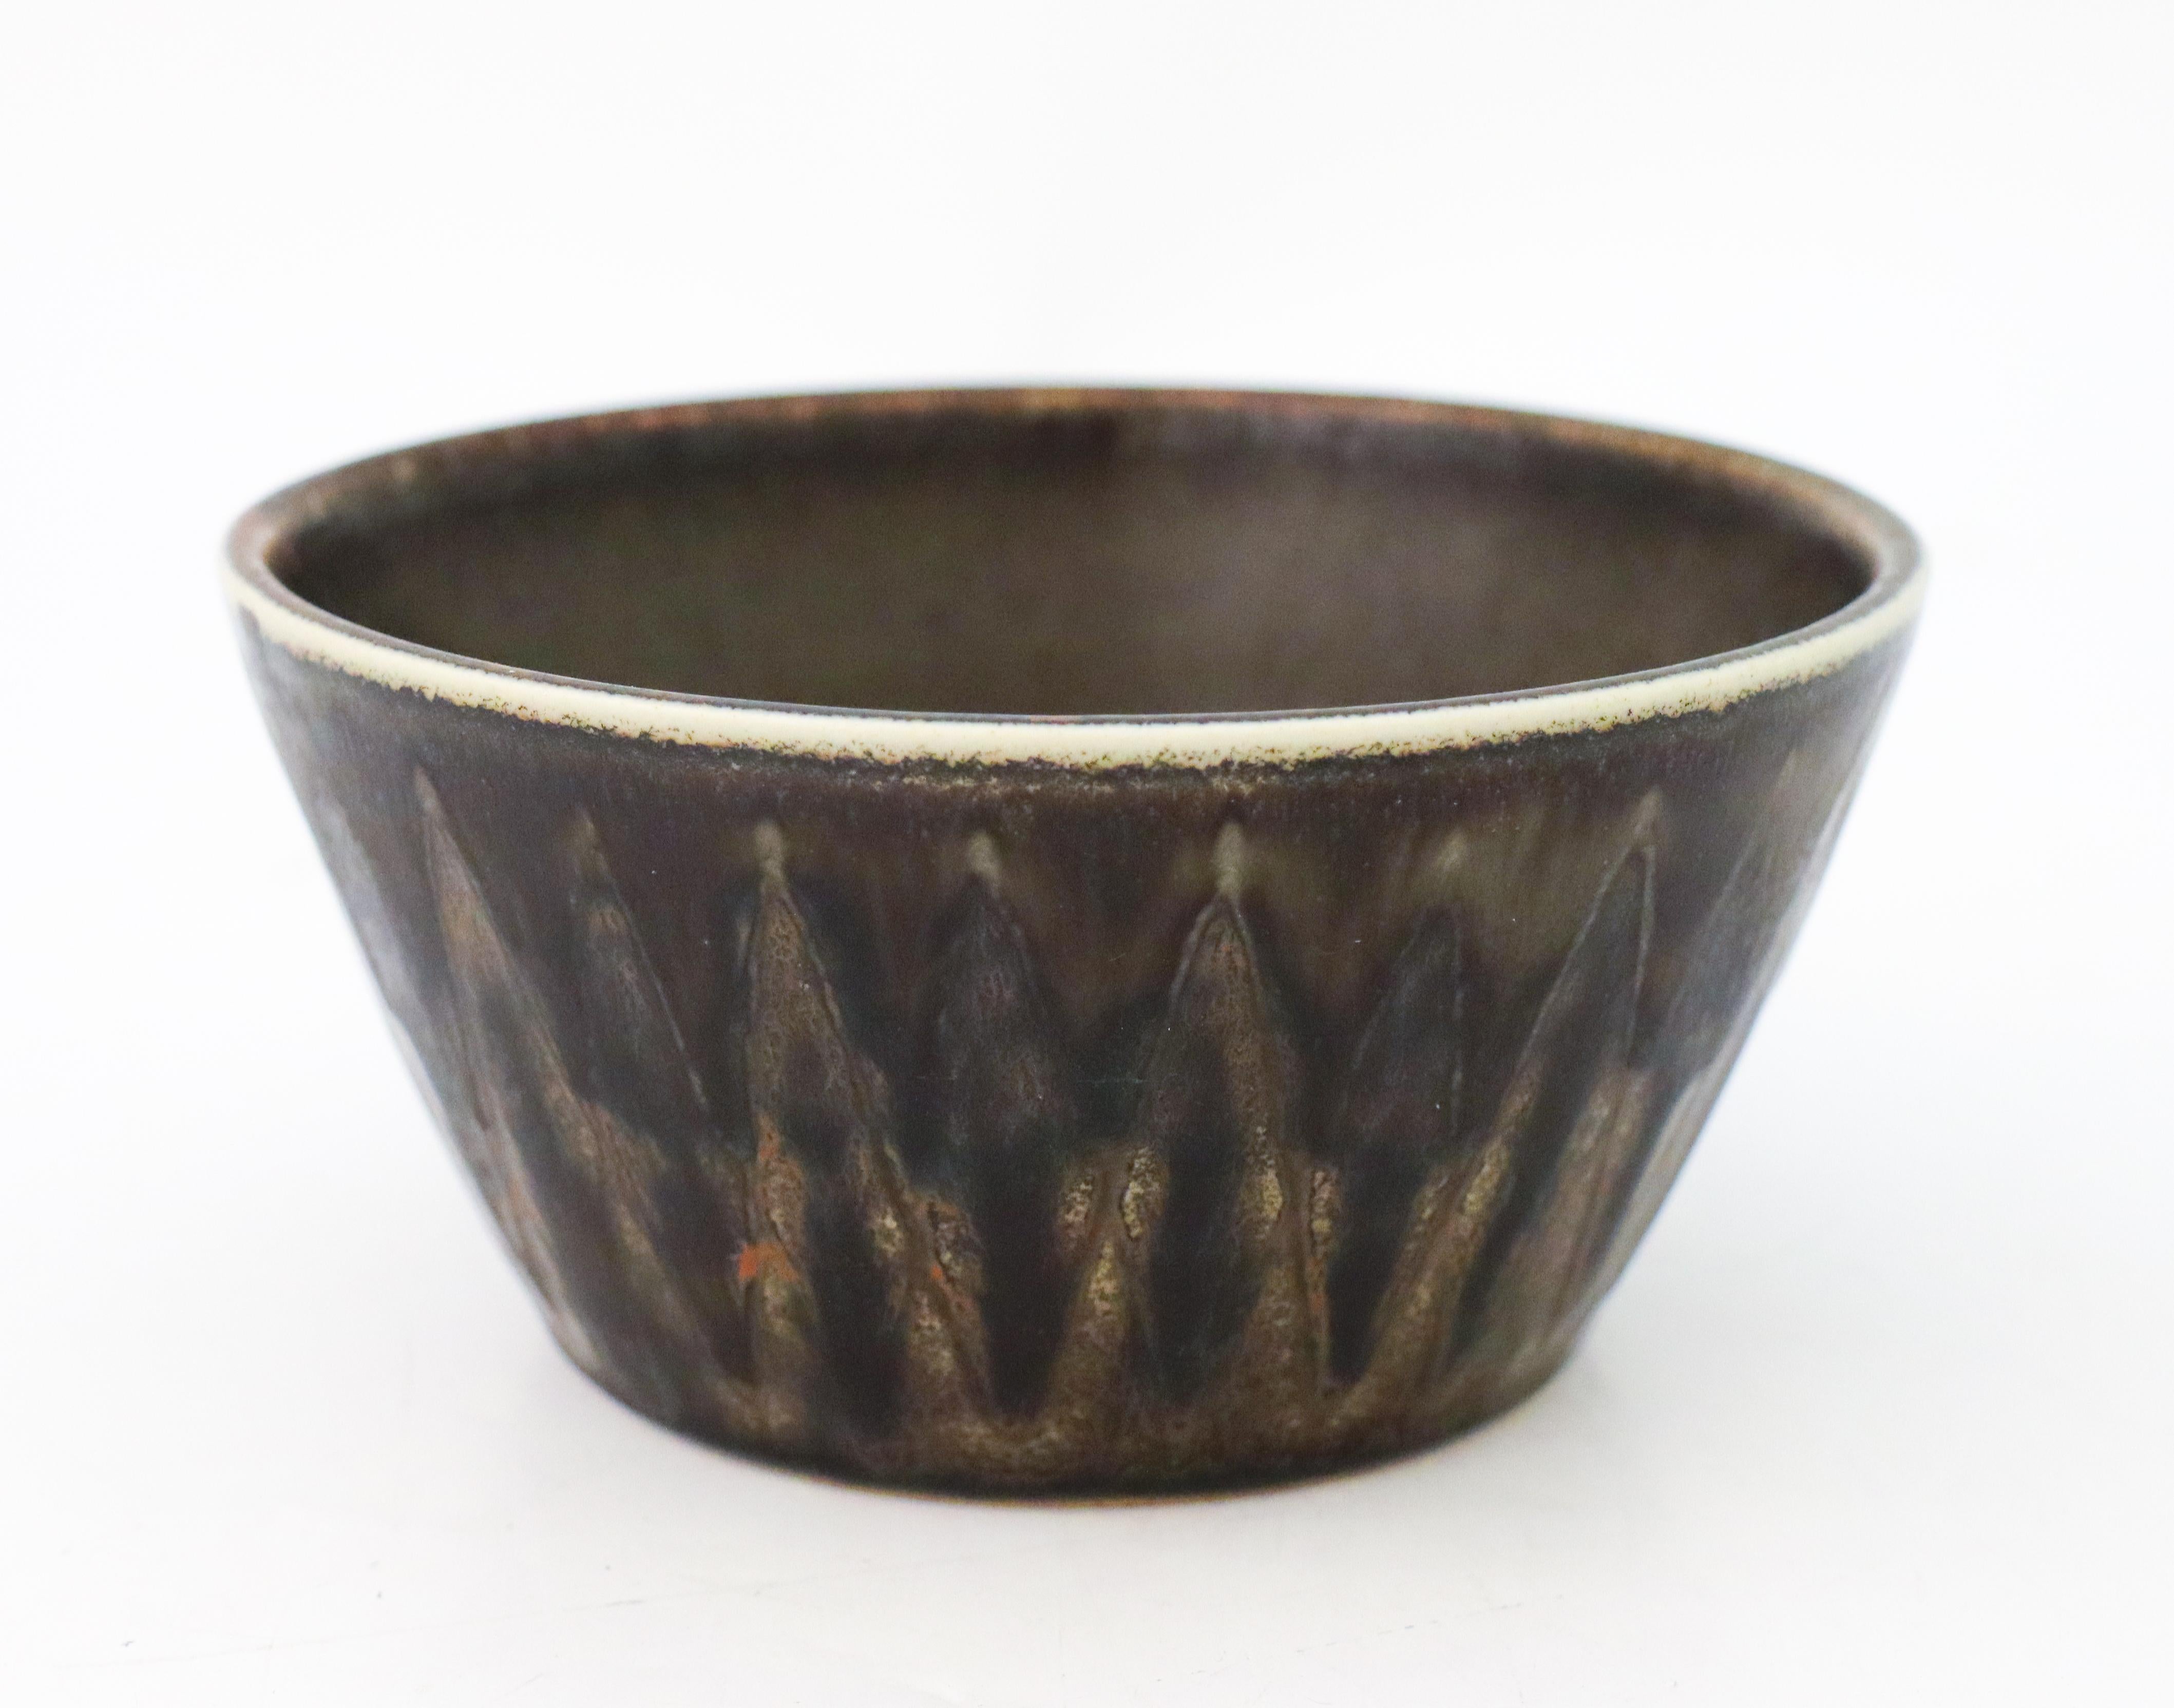 A round, brown / gray stoneware bowl designed by Carl-Harry Stålhane at Rörstrand, the bowl is 13 cm (5.2